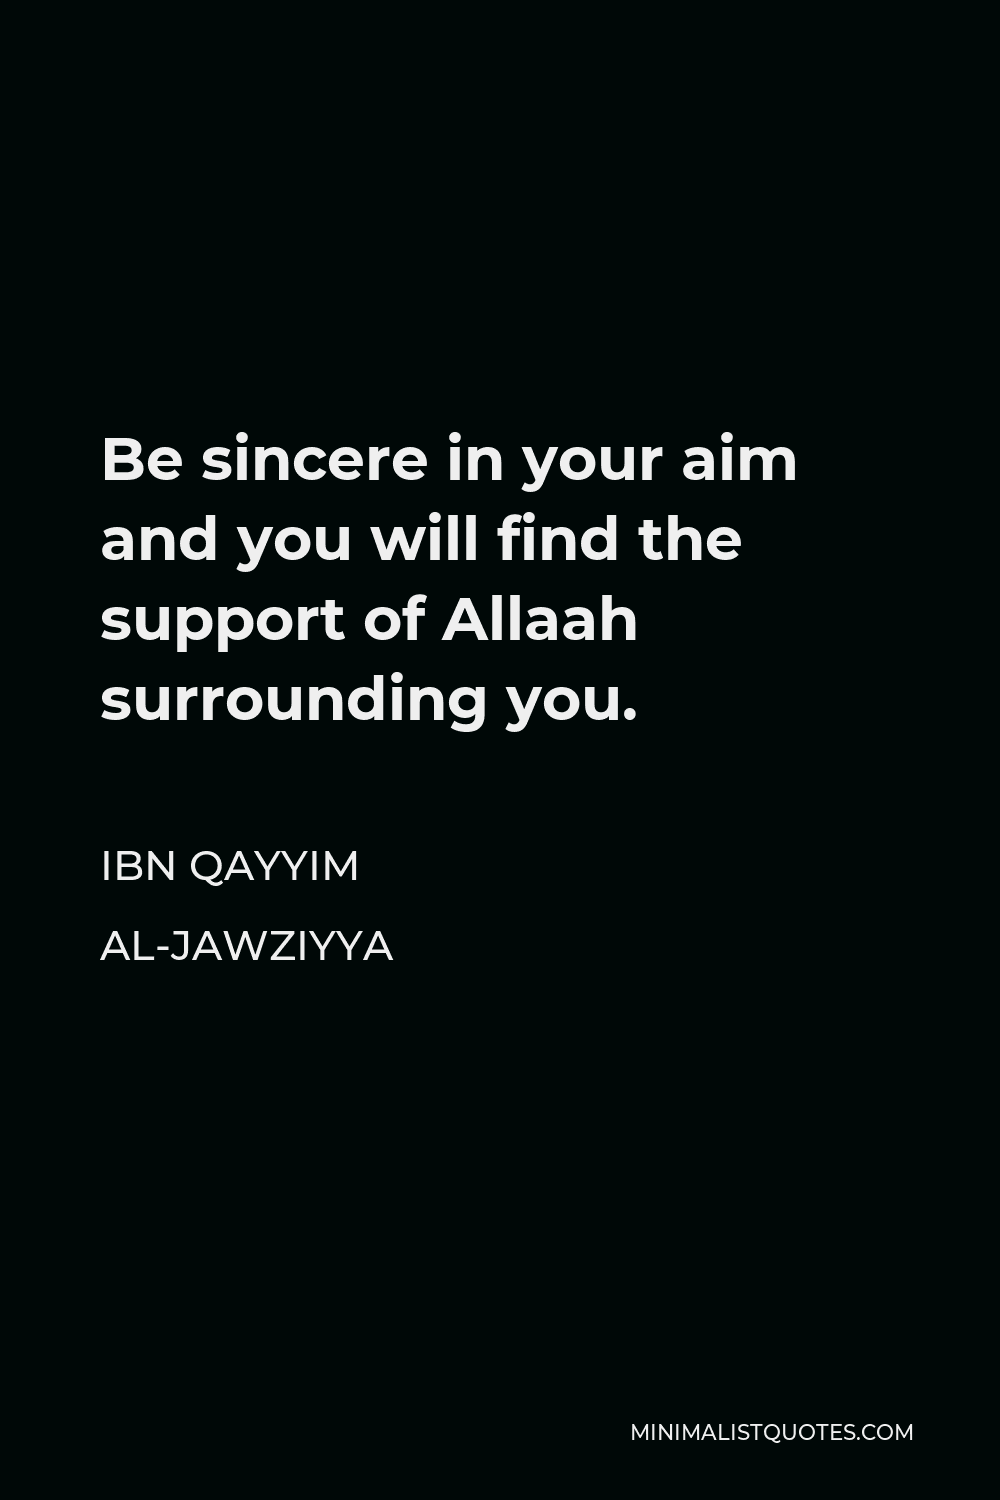 Ibn Qayyim Al-Jawziyya Quote - Be sincere in your aim and you will find the support of Allaah surrounding you.